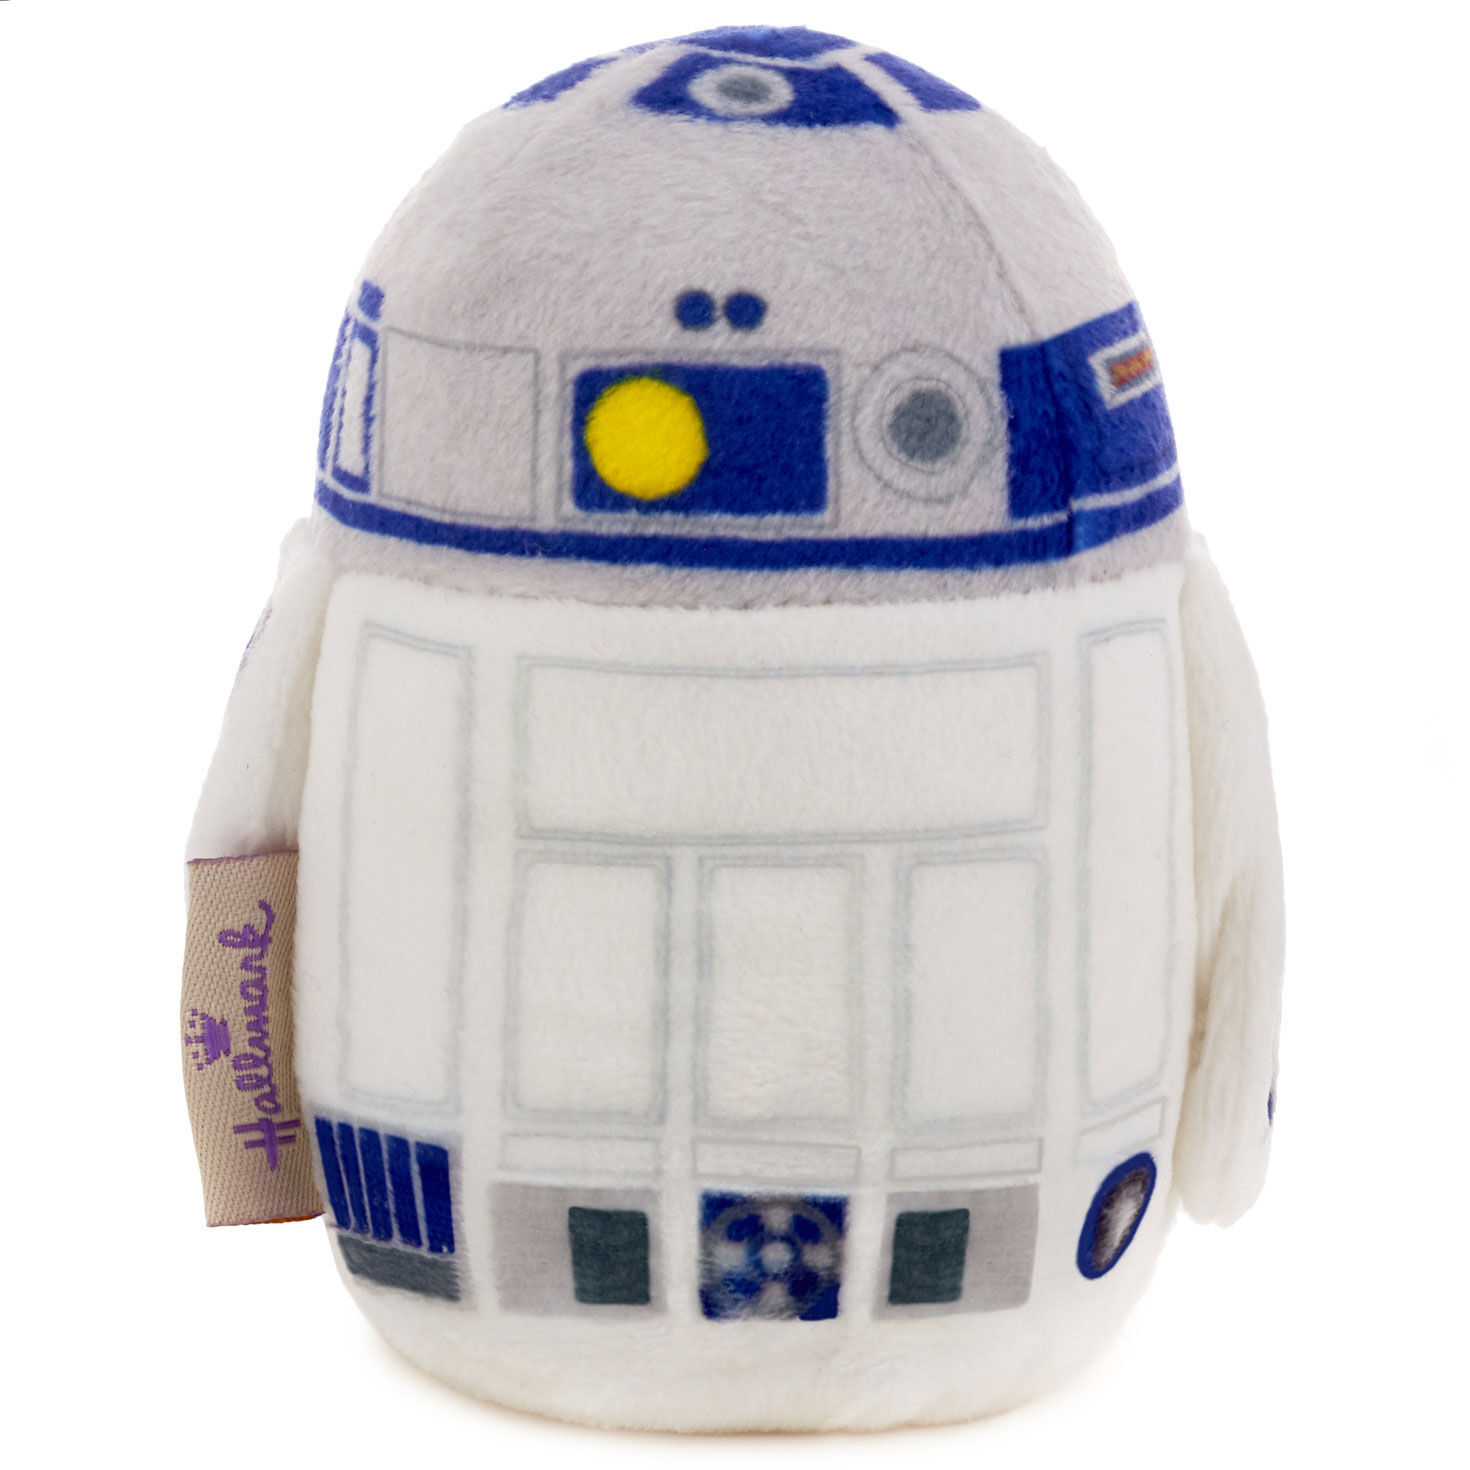 itty bittys® Star Wars™ R2-D2™ Plush With Sound for only USD 14.99 | Hallmark